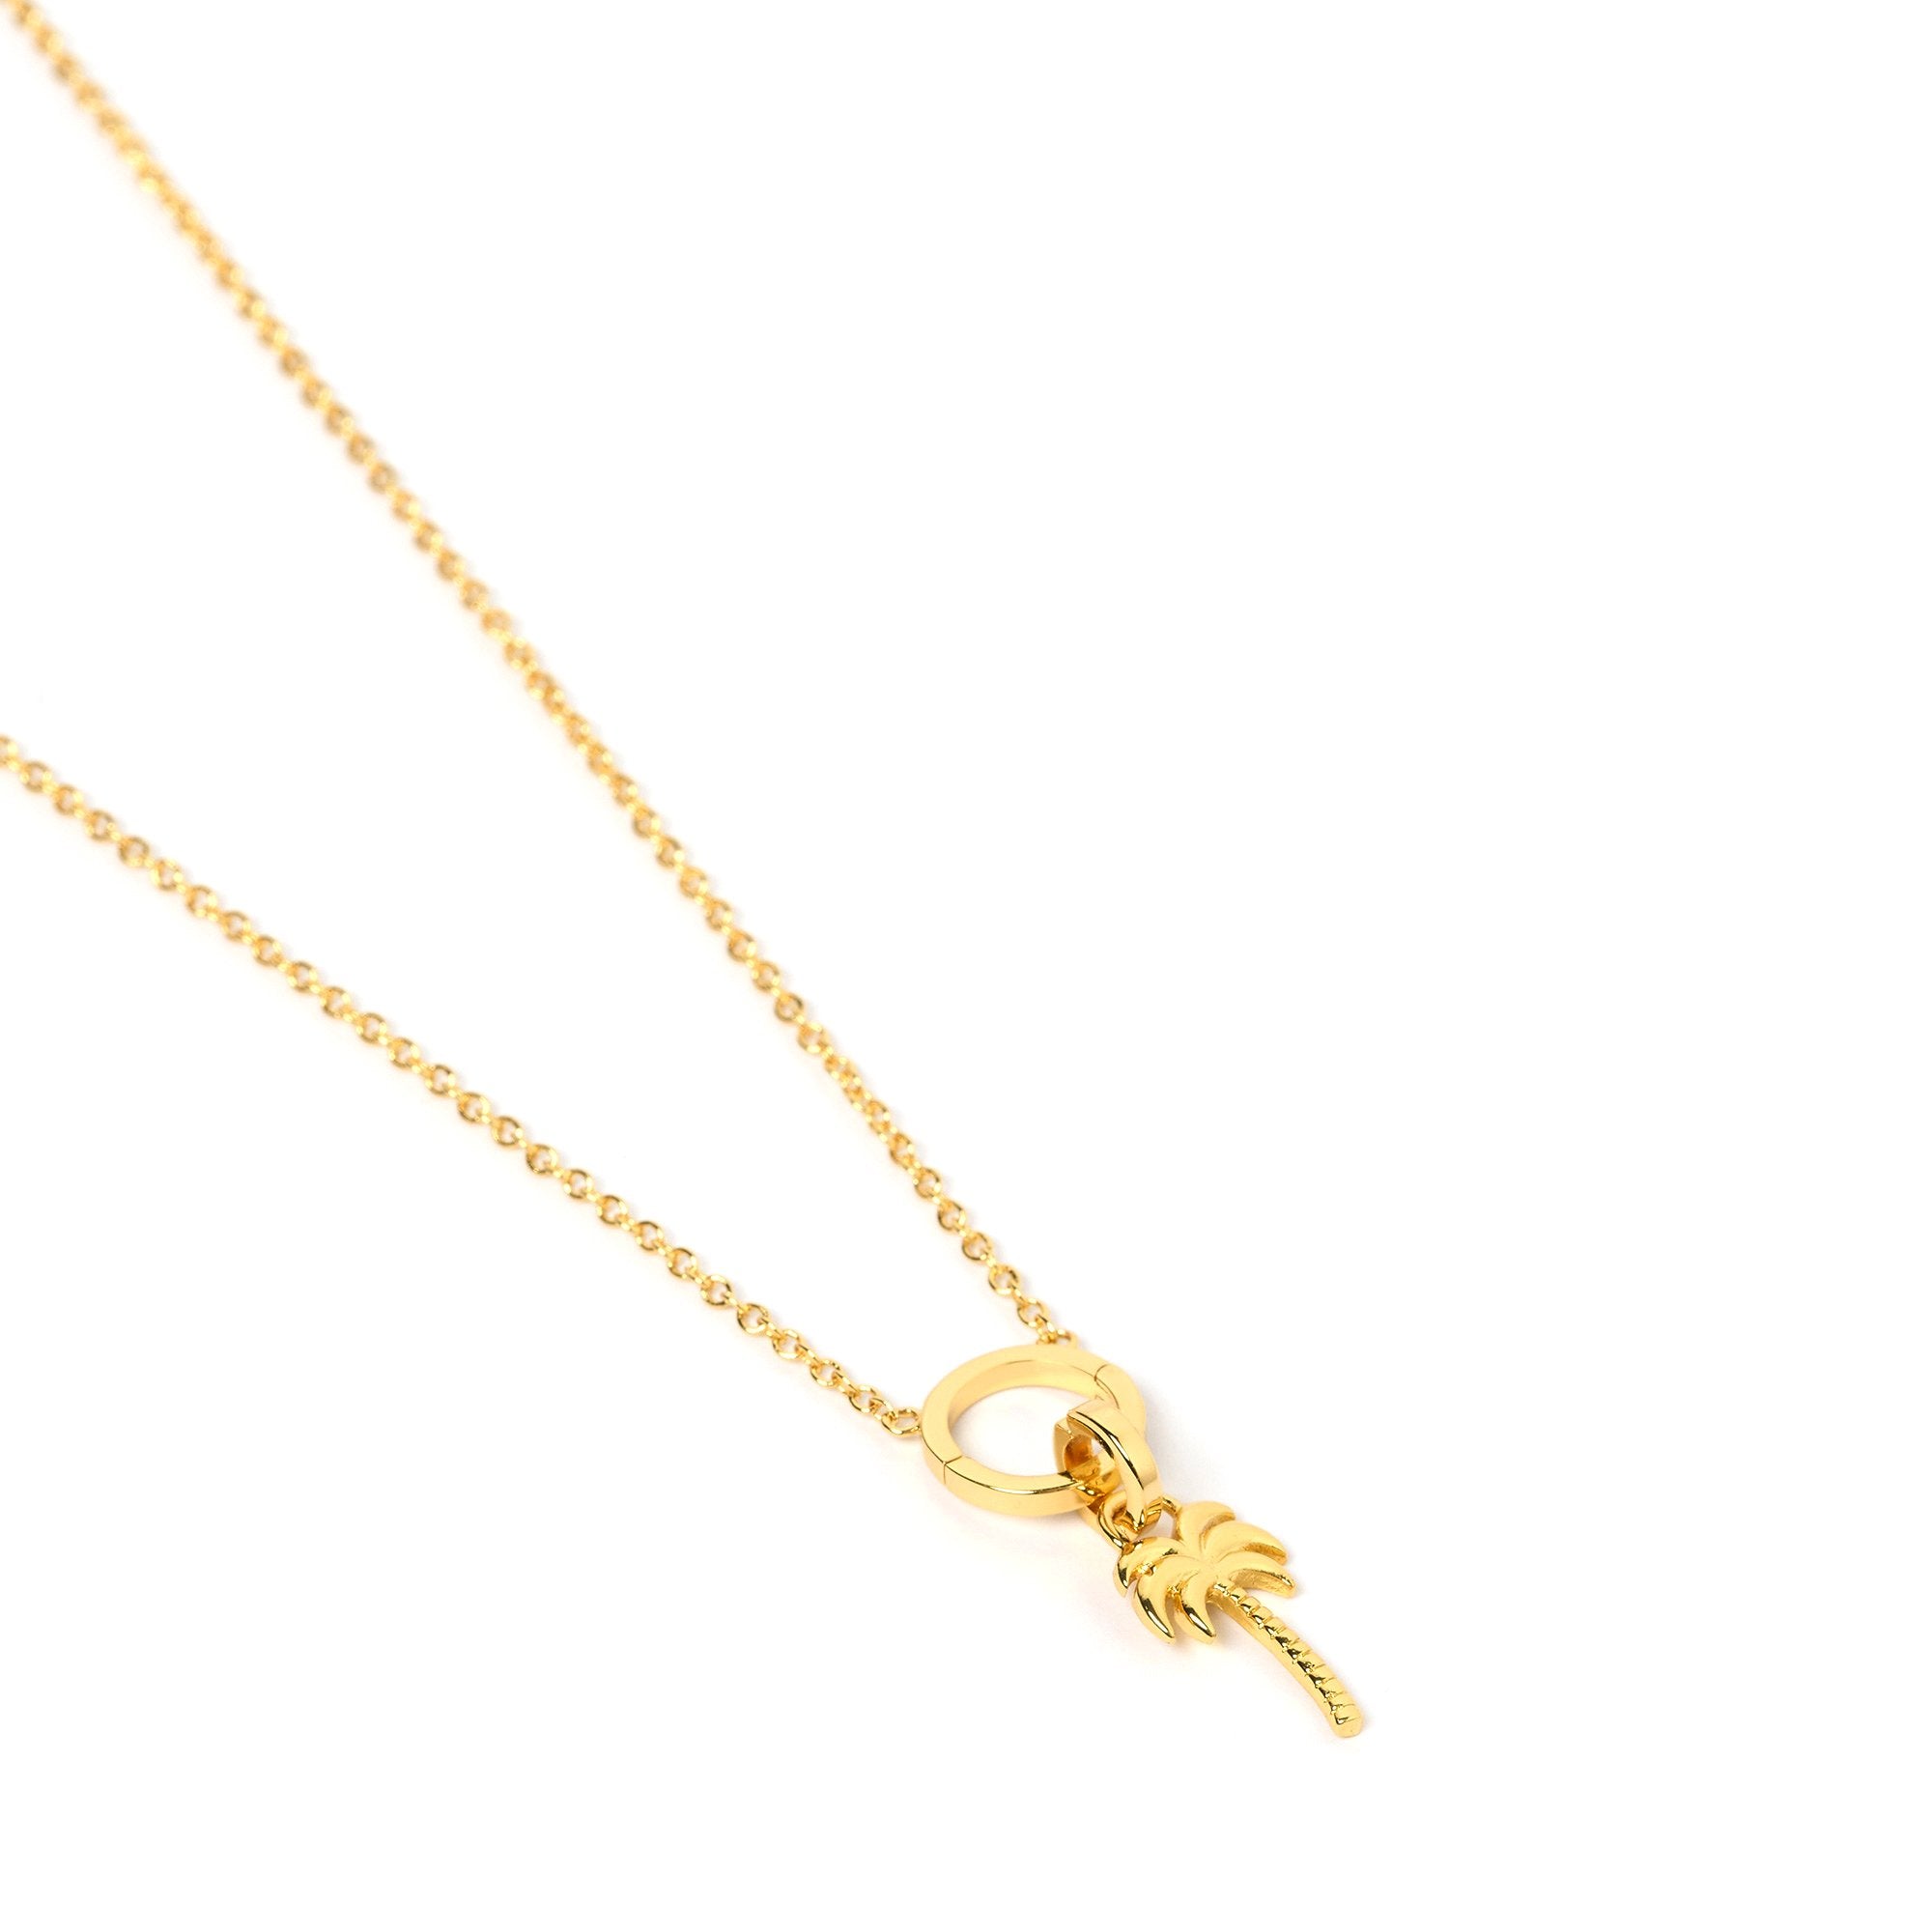 Arms Of Eve Palm Springs 'O' charm gold necklace featuring palm tree pendant, adding touch of tropical charm to any outfit